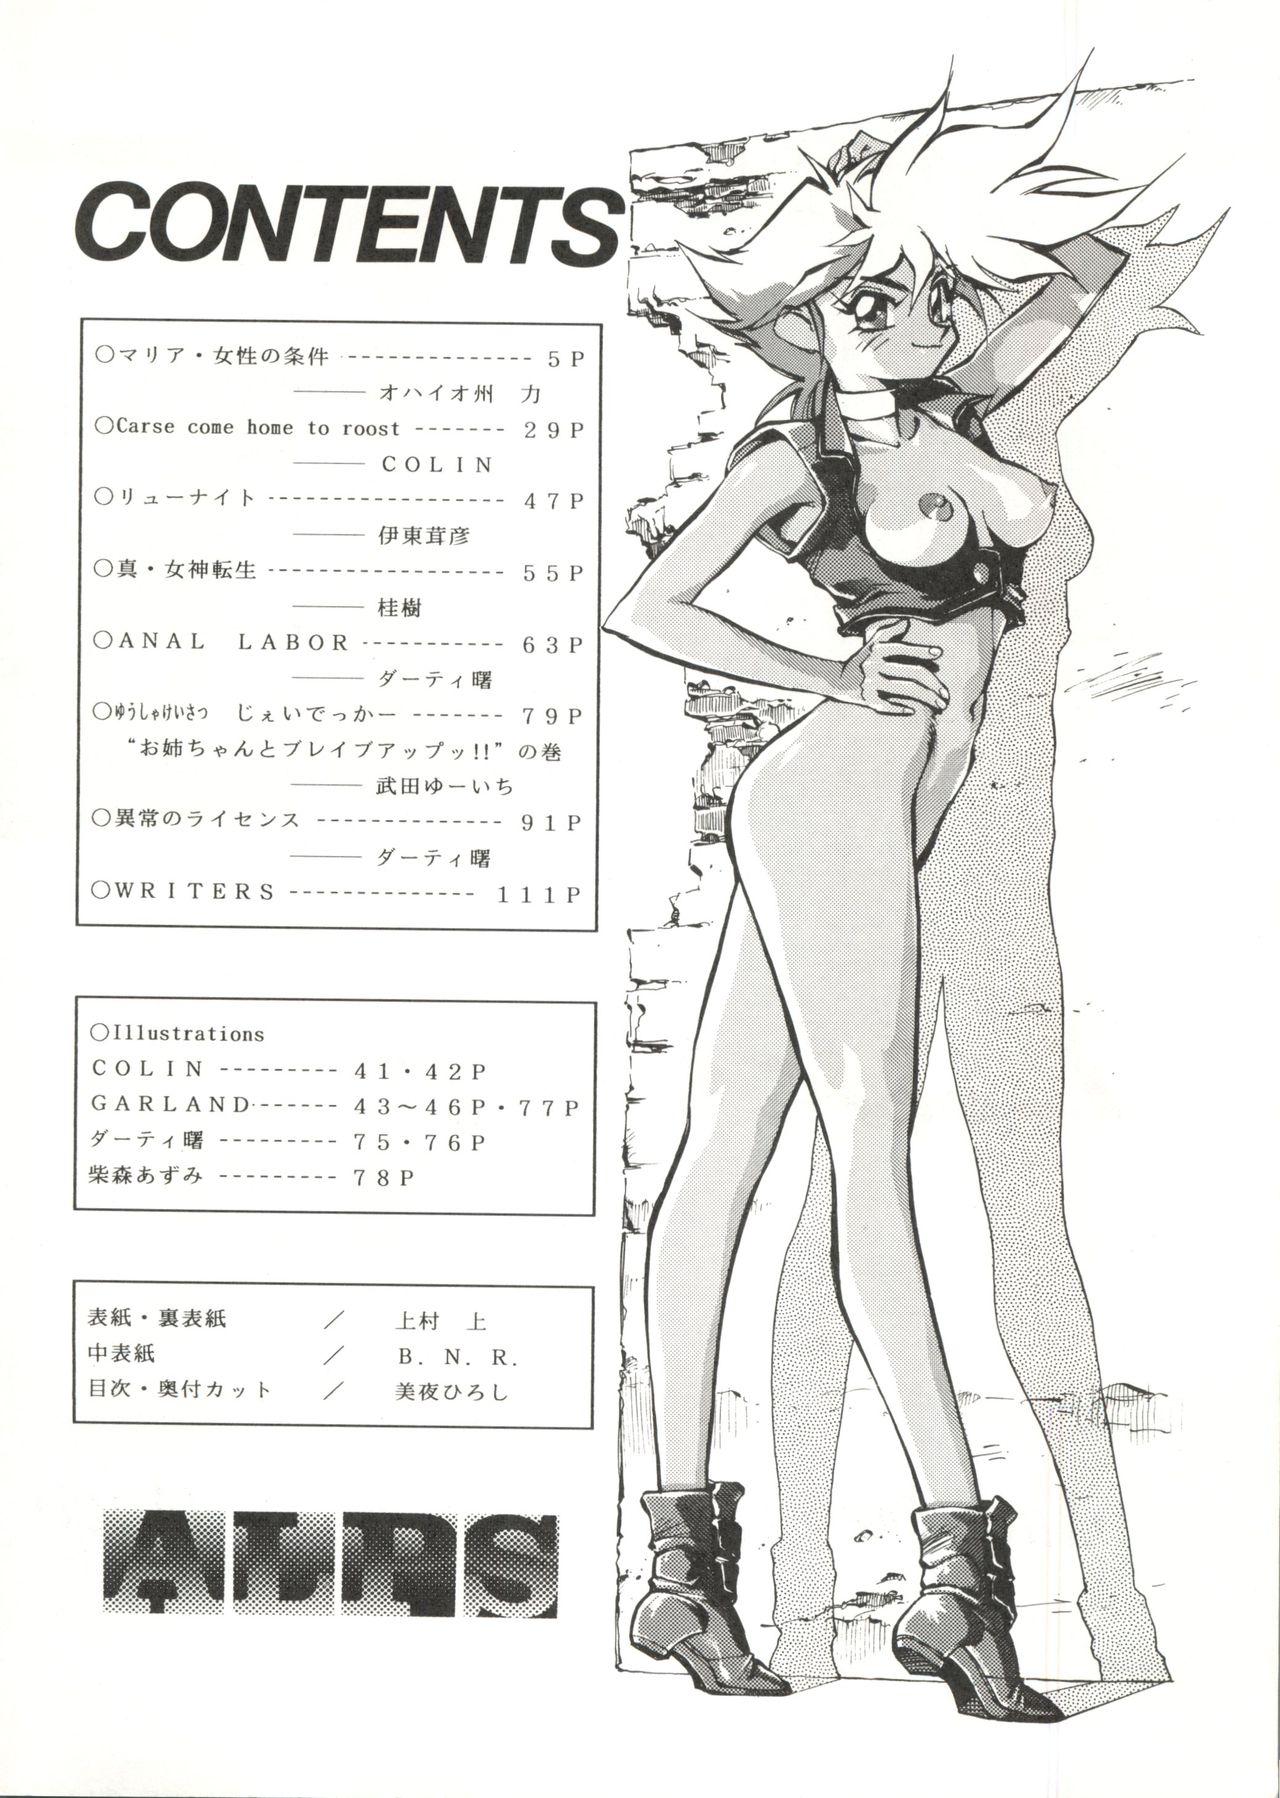 Hot Whores LOOK OUT 31 - Sailor moon Ghost sweeper mikami Lord of lords ryu knight Patlabor Brave police j decker Solo Girl - Page 3